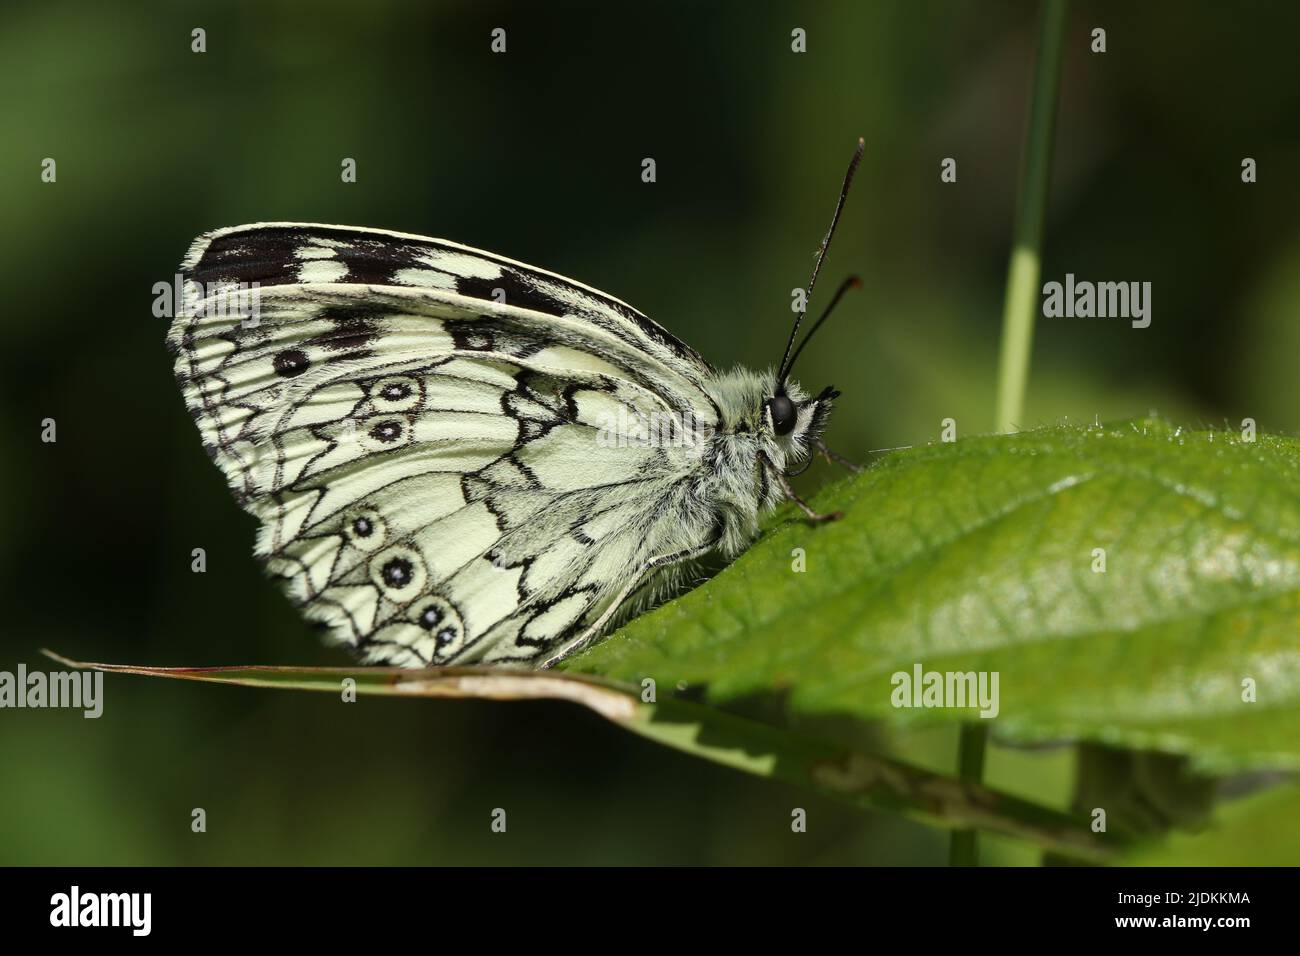 A Marbled White Butterfly, Melanargia galathea, perched on a leaf. Stock Photo